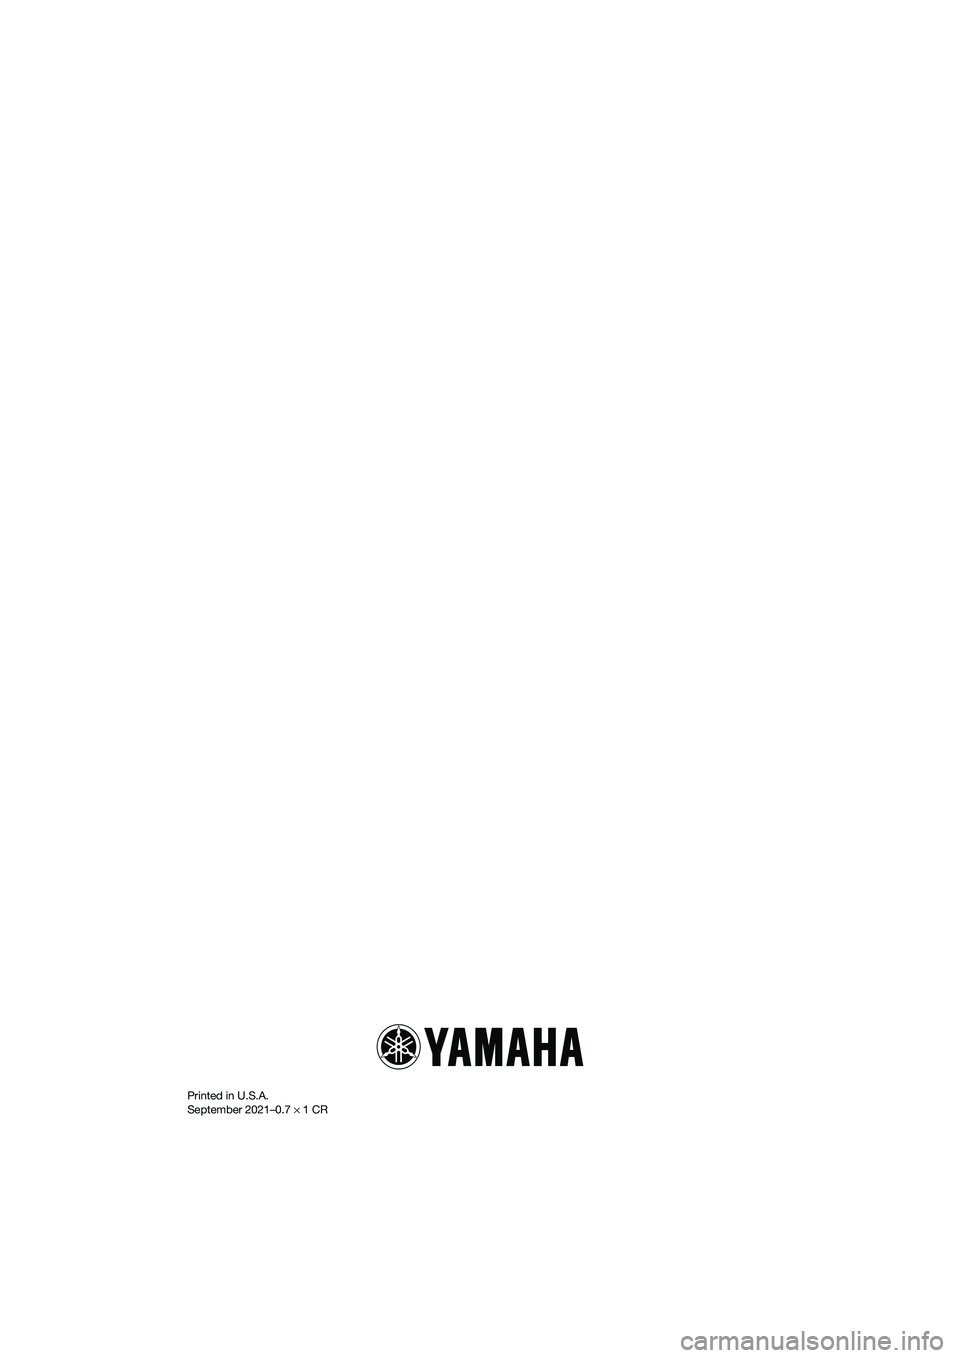 YAMAHA FX HO CRUISER 2022  Owners Manual Printed in U.S.A.
September 2021–0.7 × 1 CR
UF3V73E0.book  Page 1  Friday, October 8, 2021  1:30 PM 